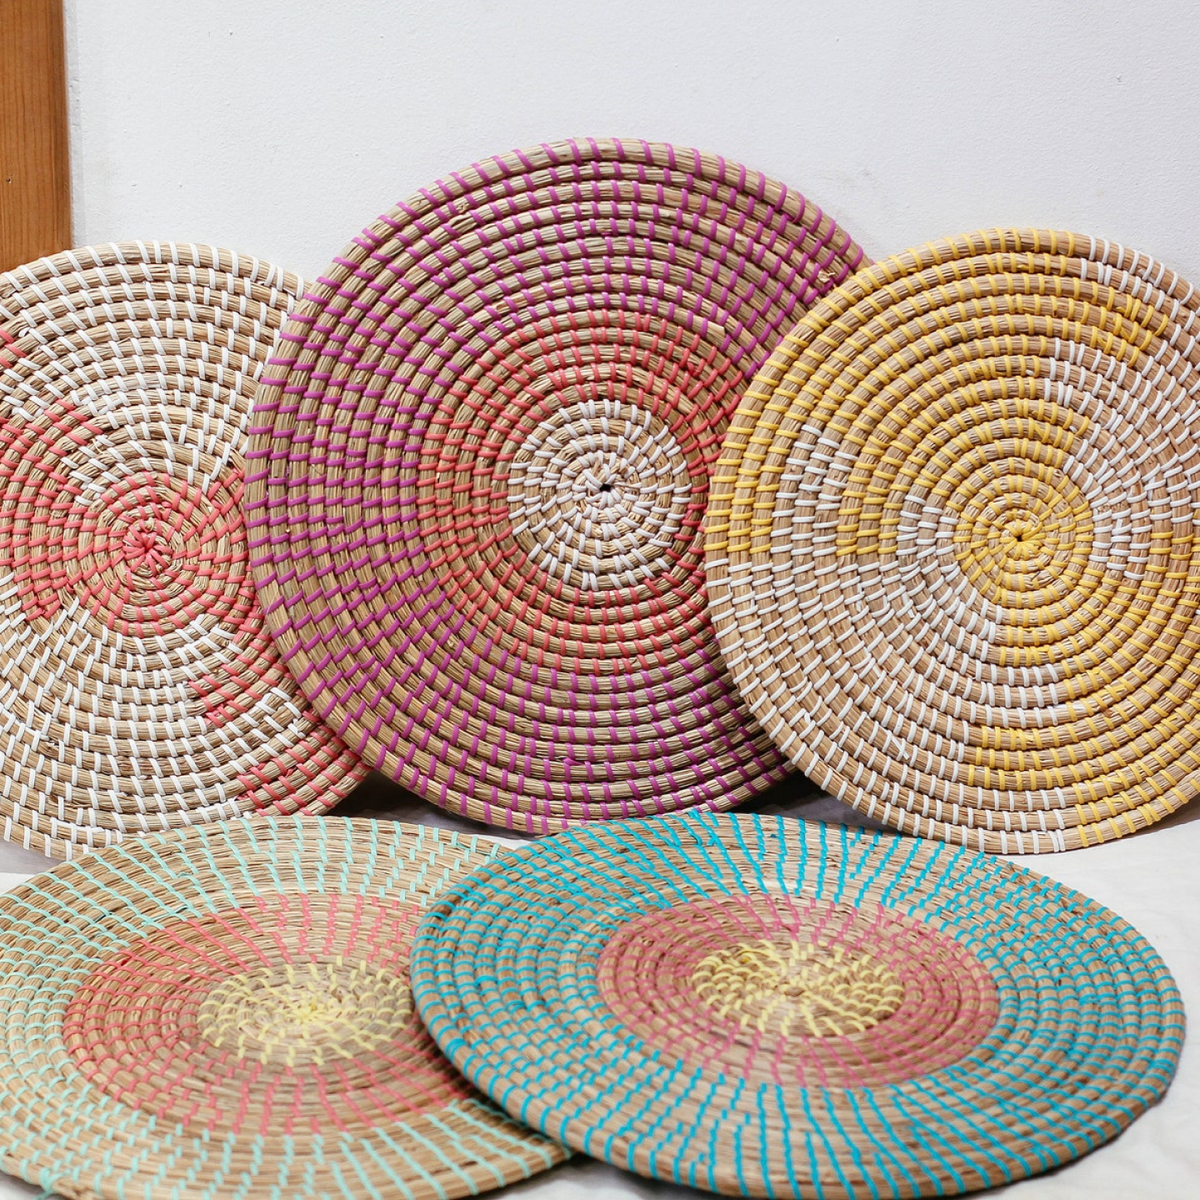 Seagrass weaving handmade Placemat MD